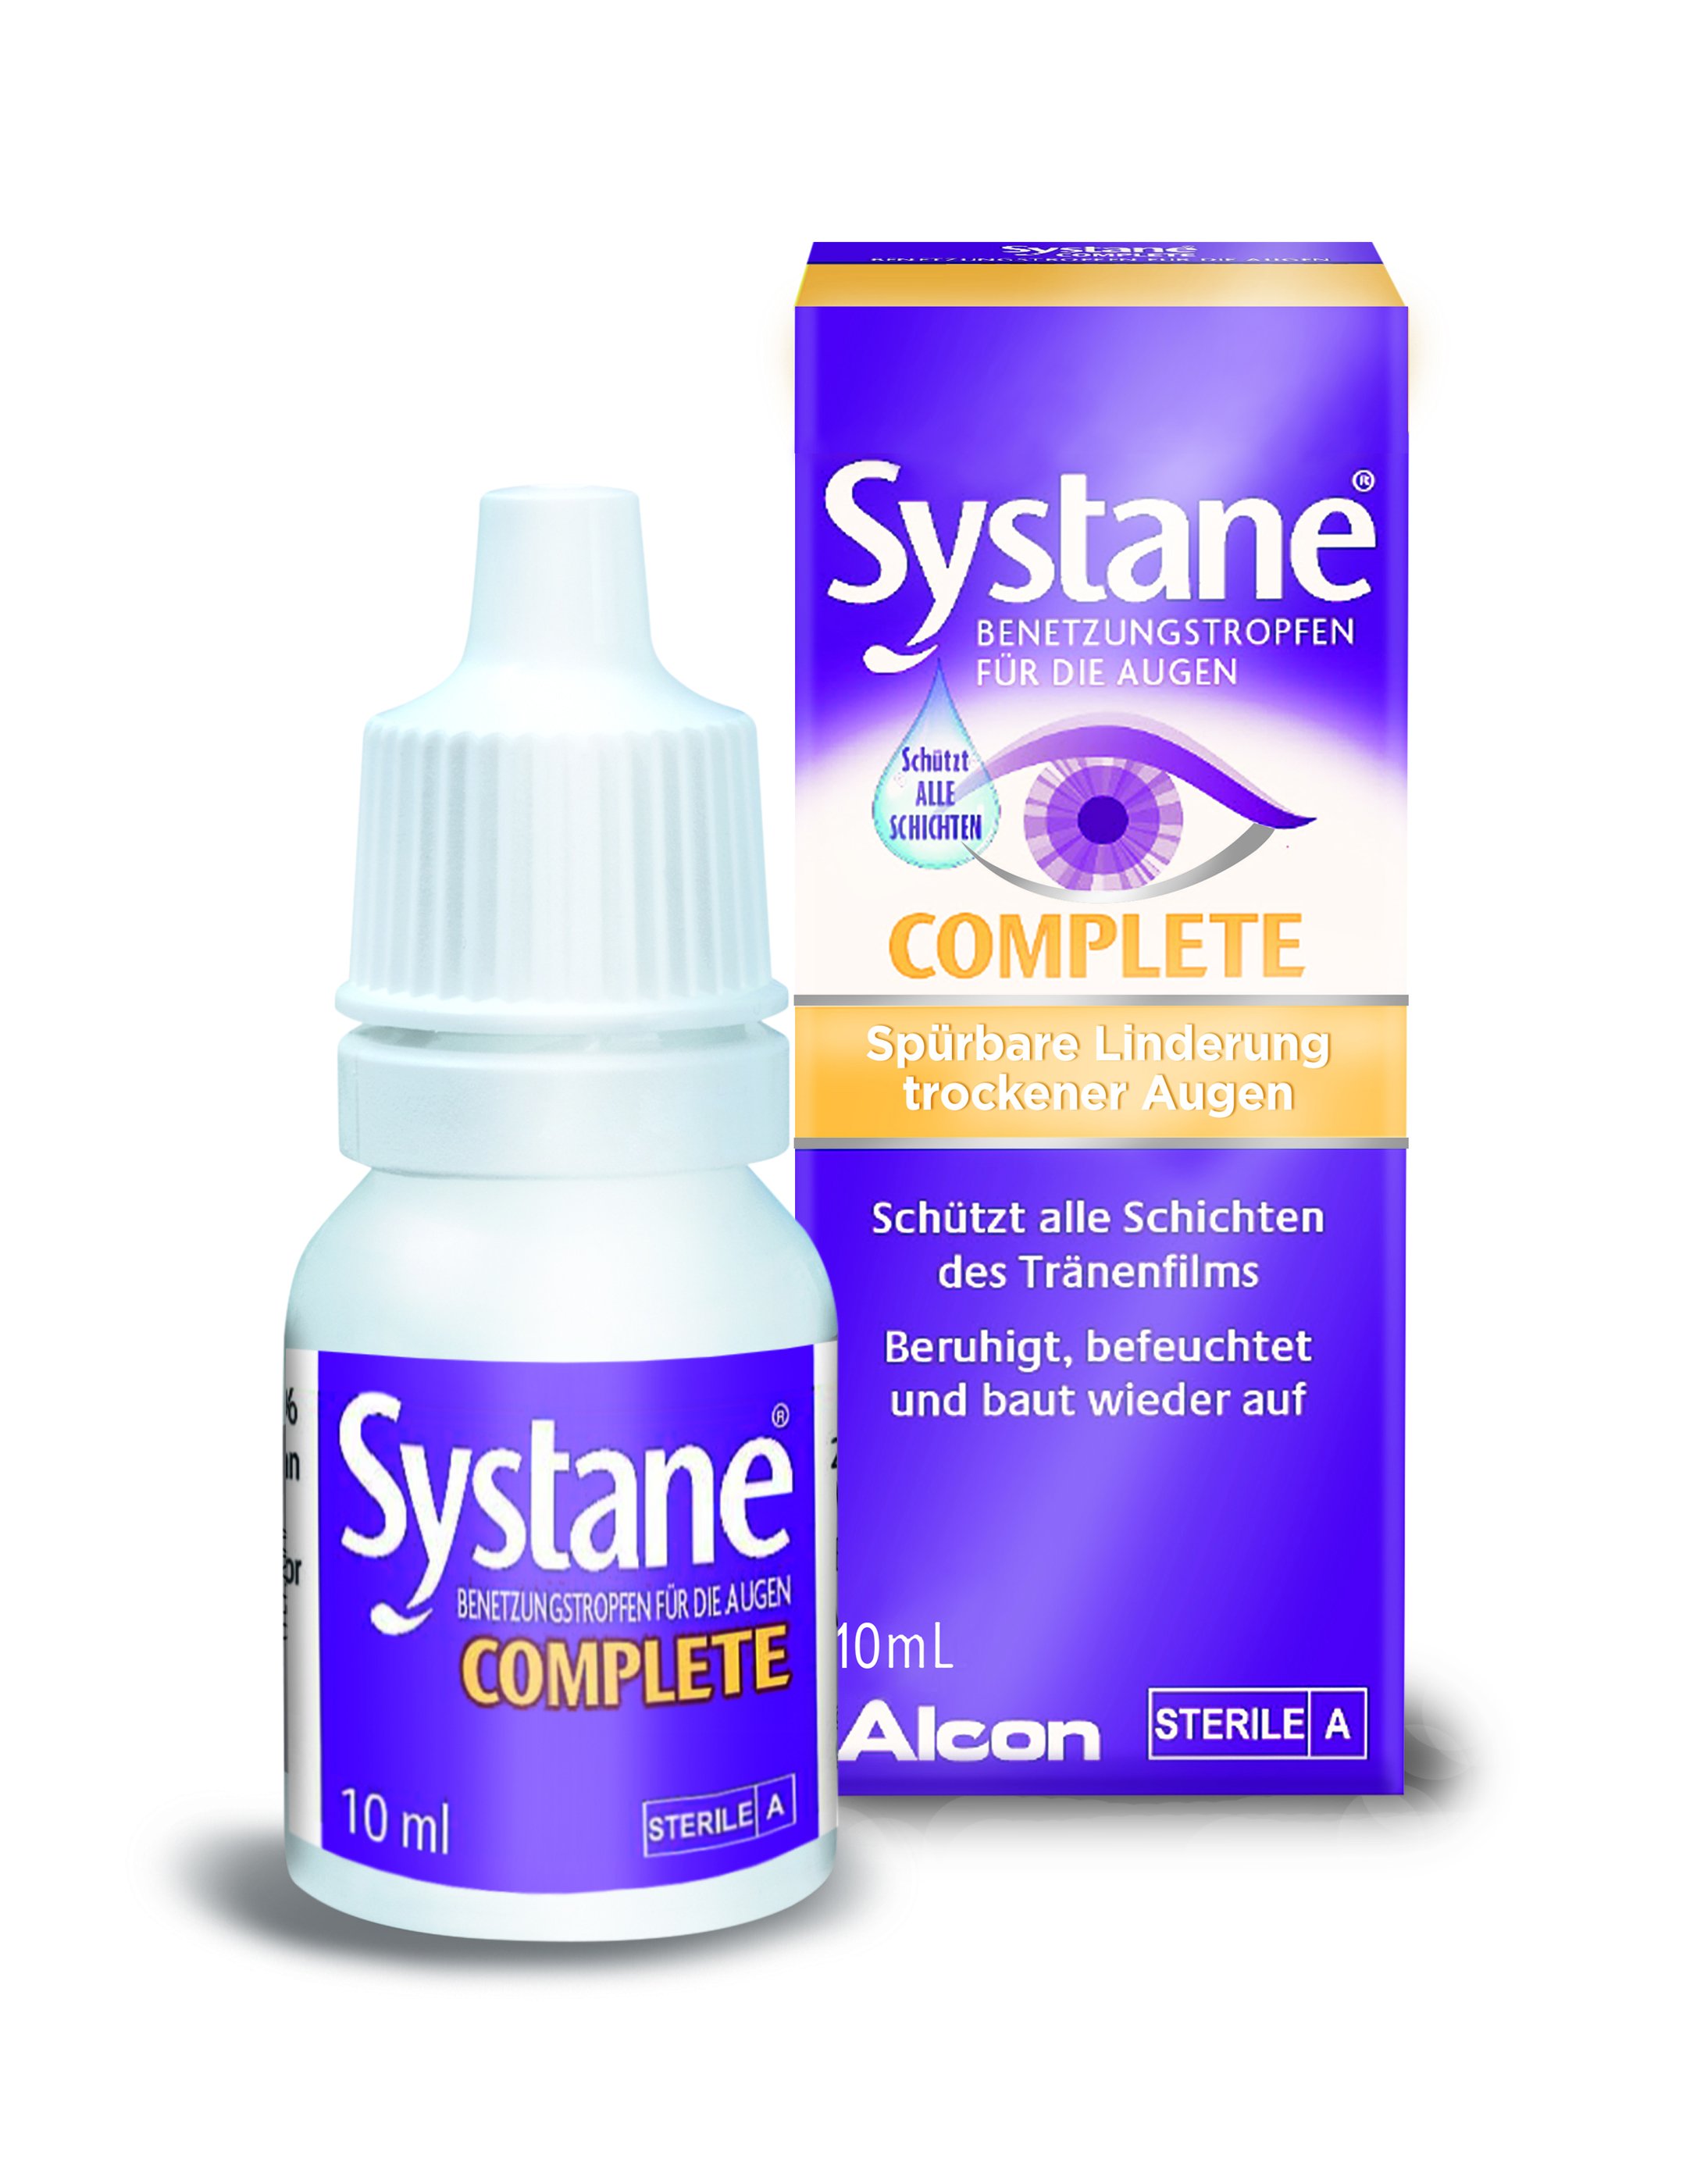 Systane COMPLETE (10ml)